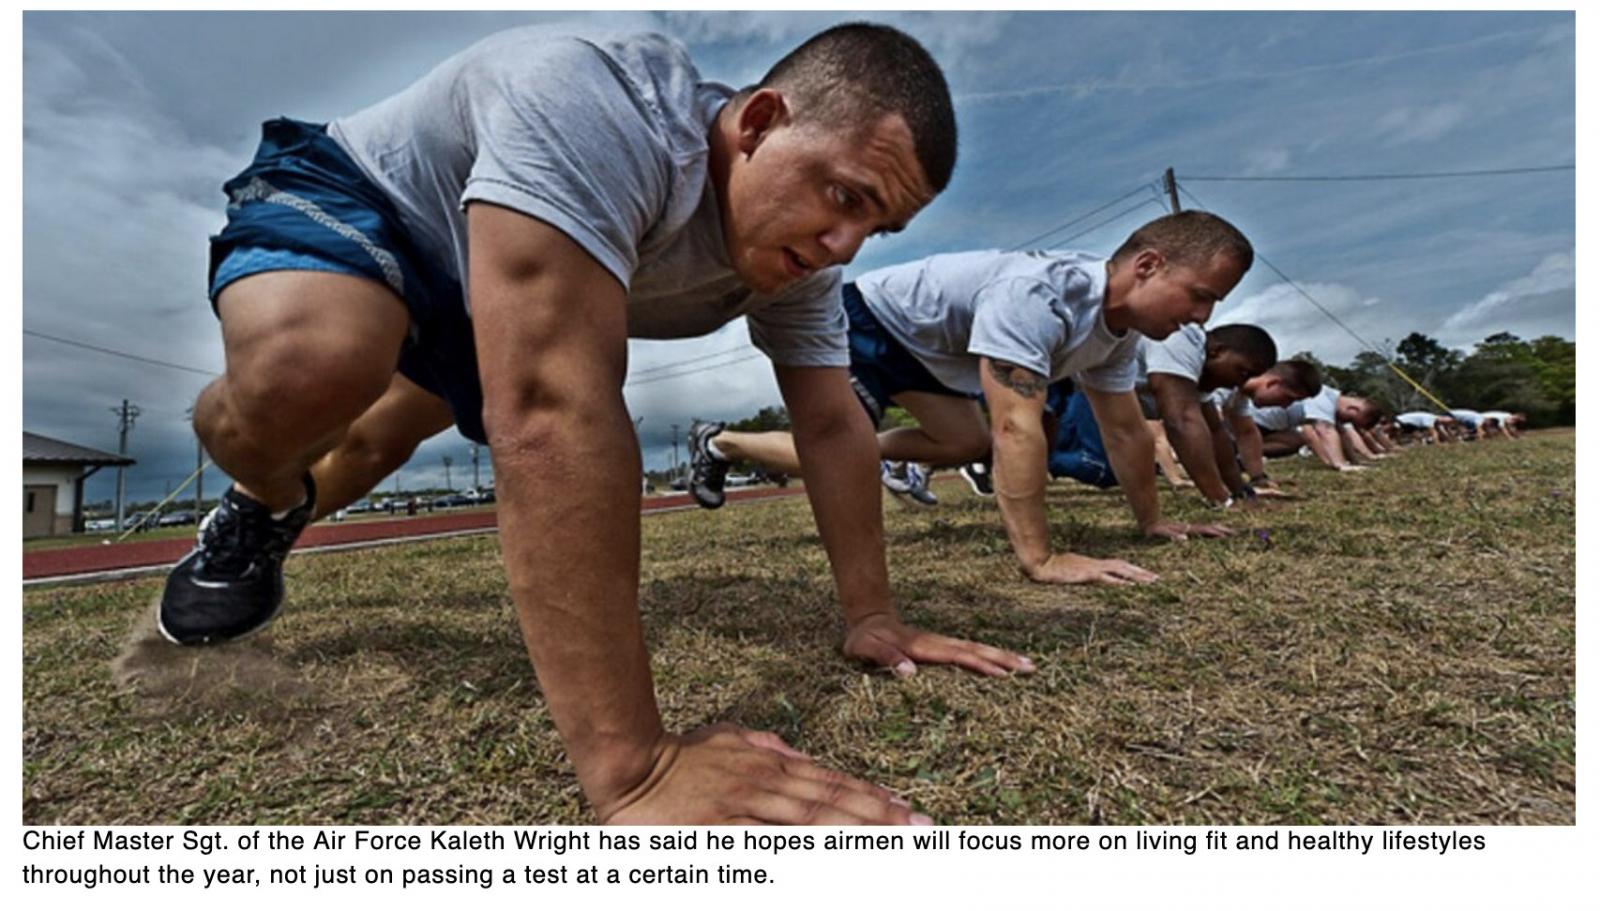  Can digital fitness coaching get airmen in shape? The Air Force wants to know